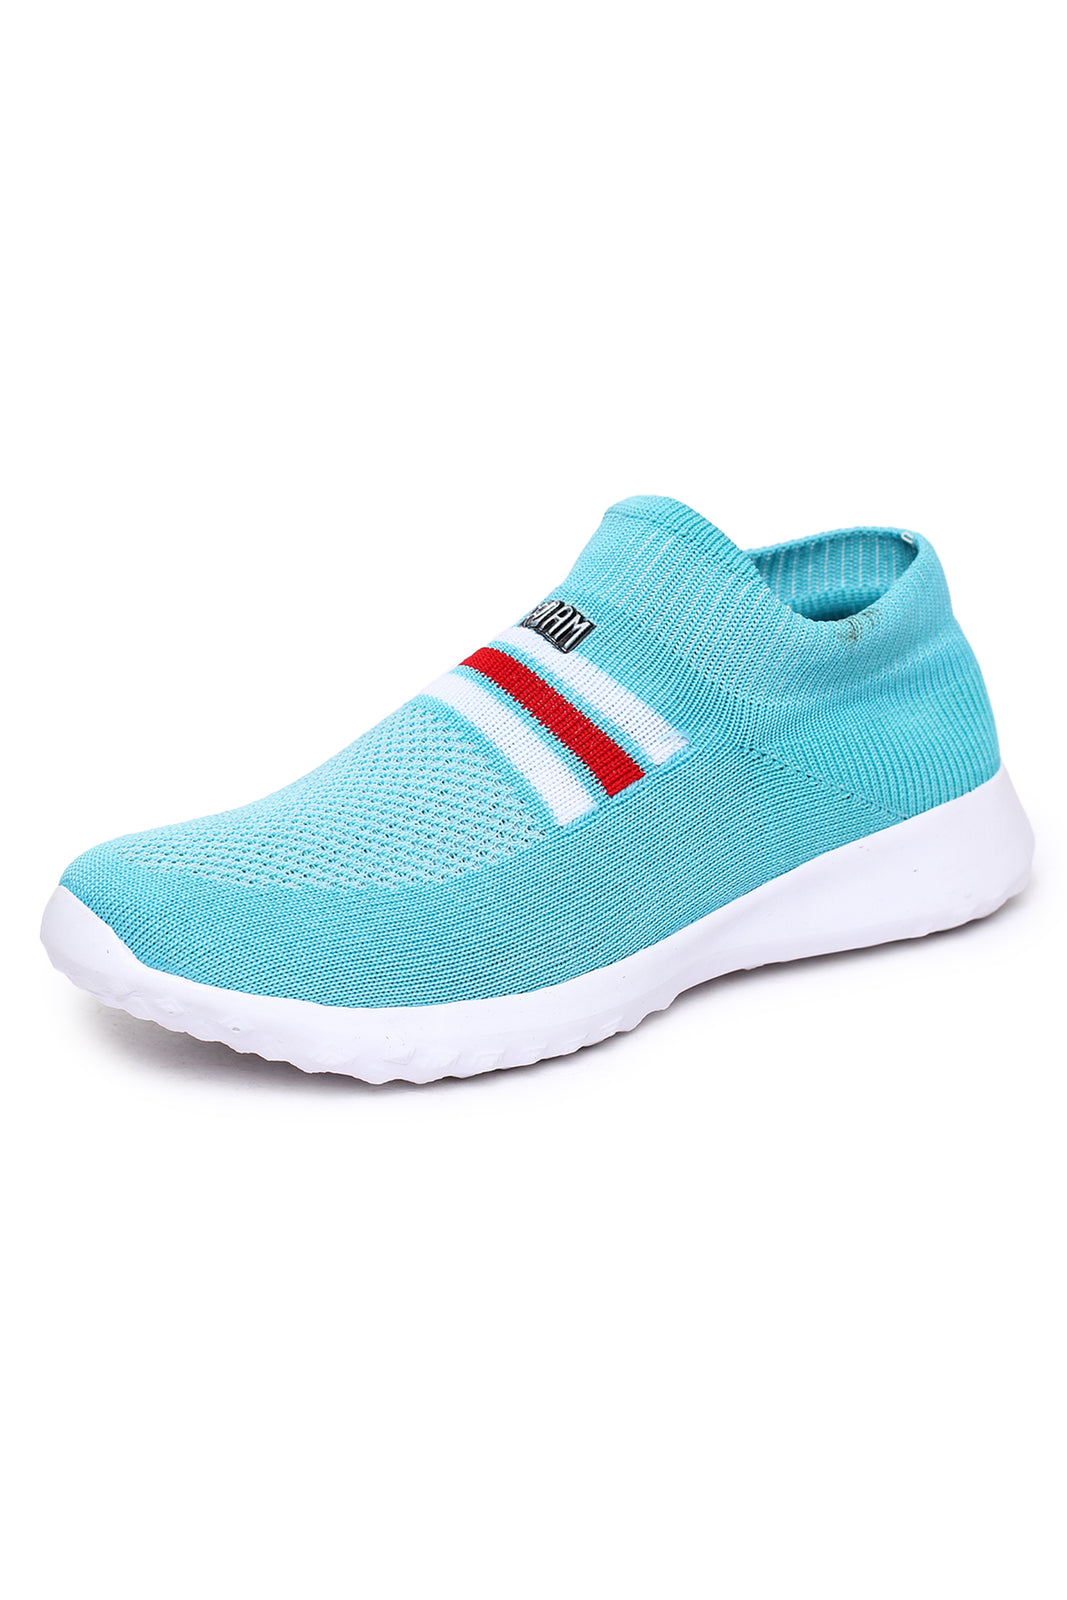 Blue Solid Mesh Lace Up Lifestyle Casual Shoes For Women